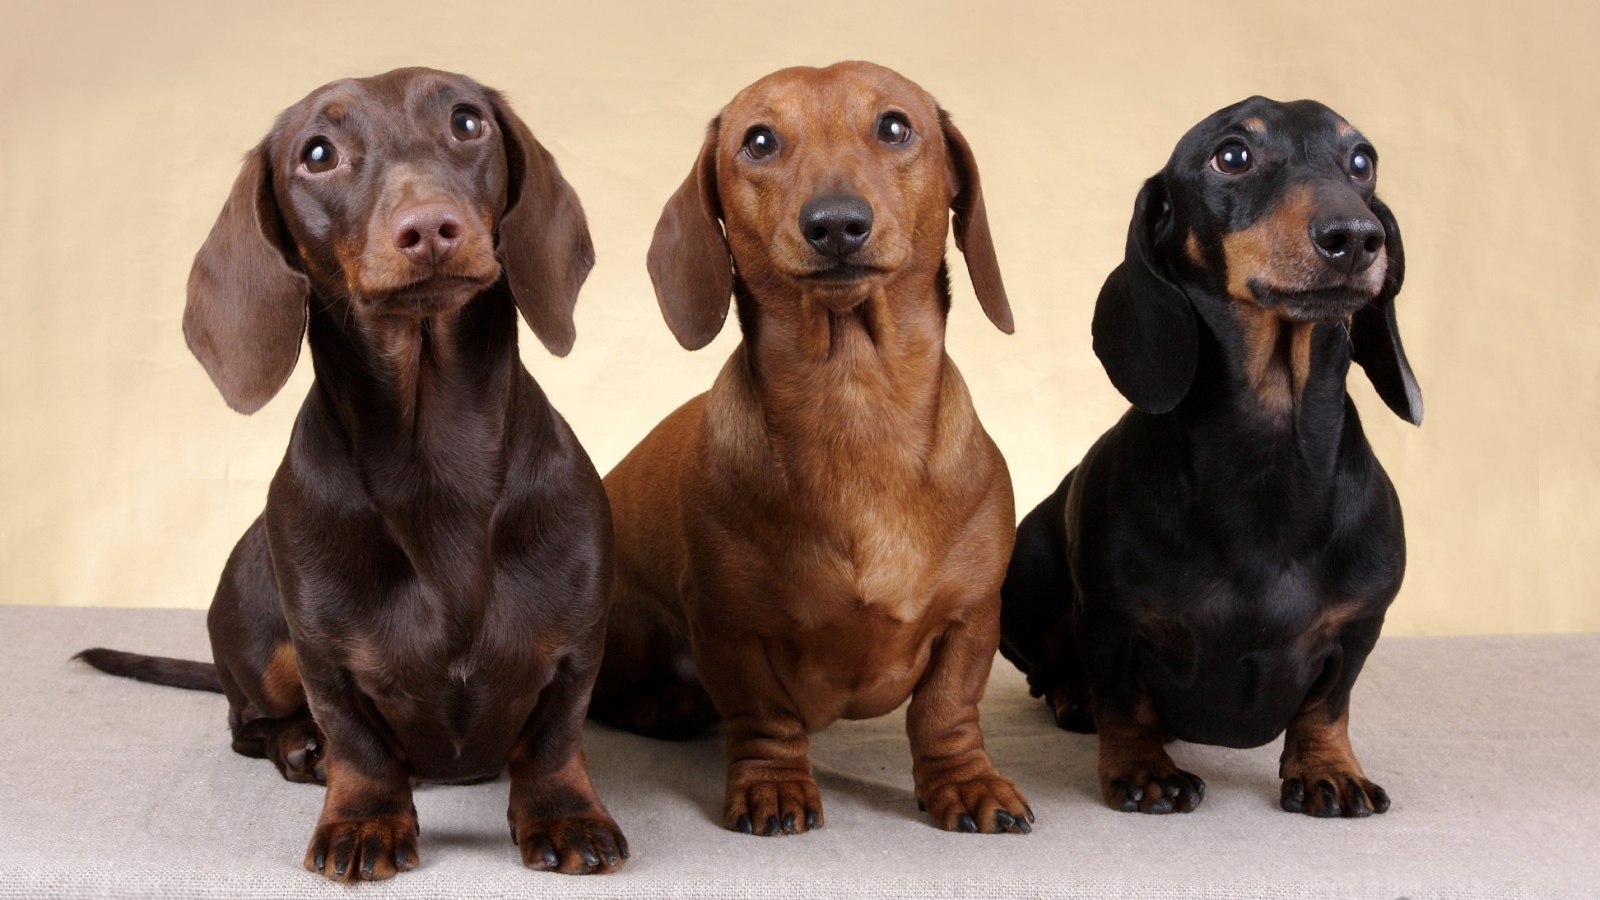 Dachshunds of different colors